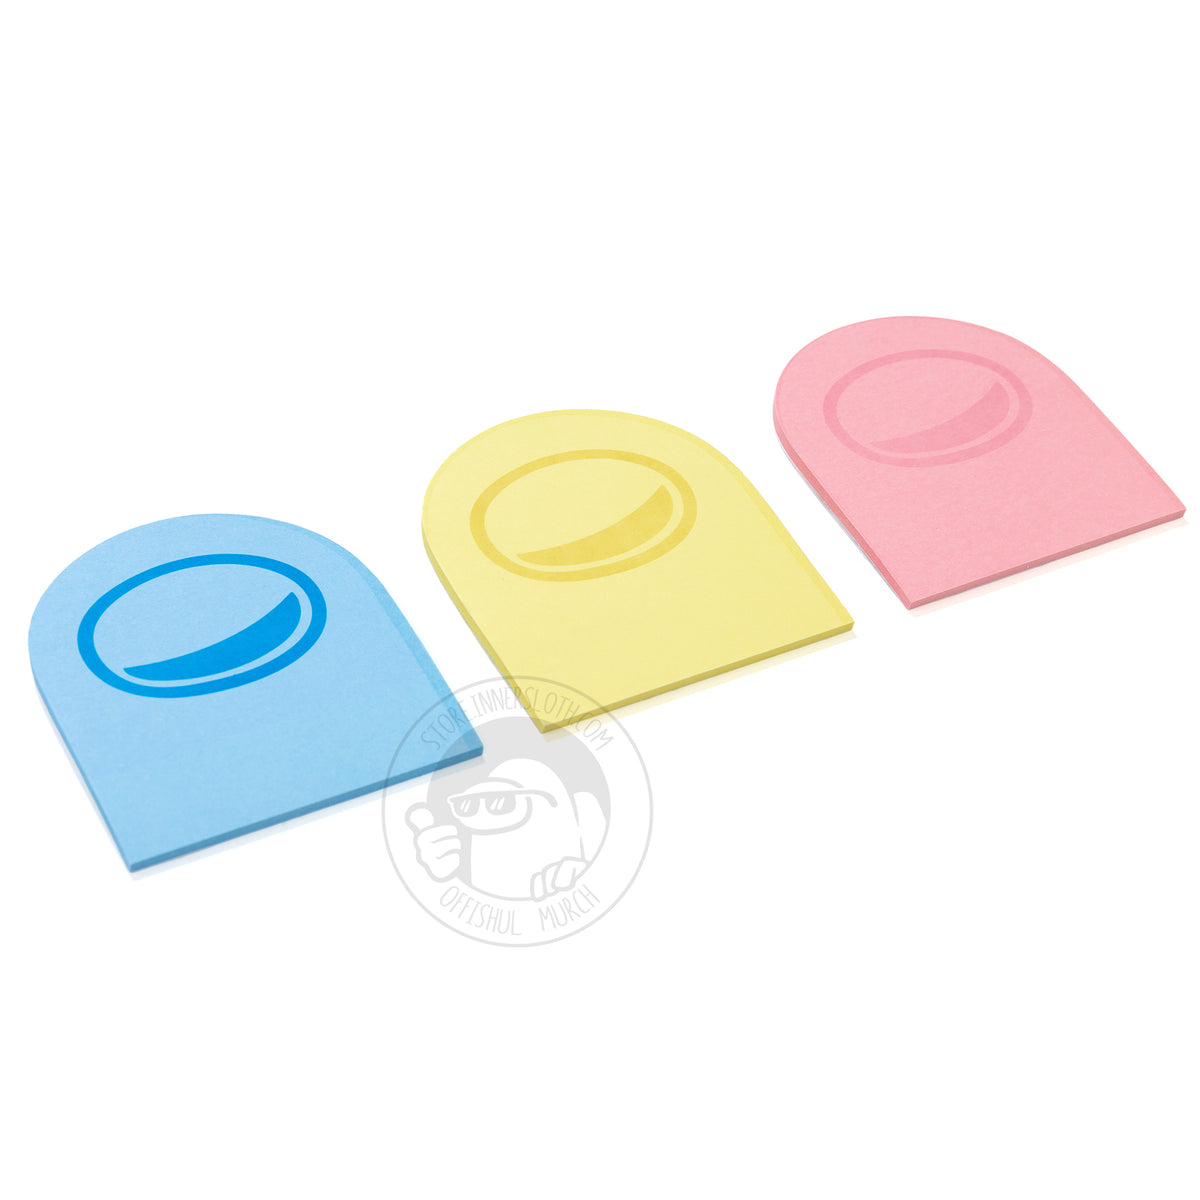 A product photo of each color pack of Post-It notes - blue, yellow, and pink - laying side by side.